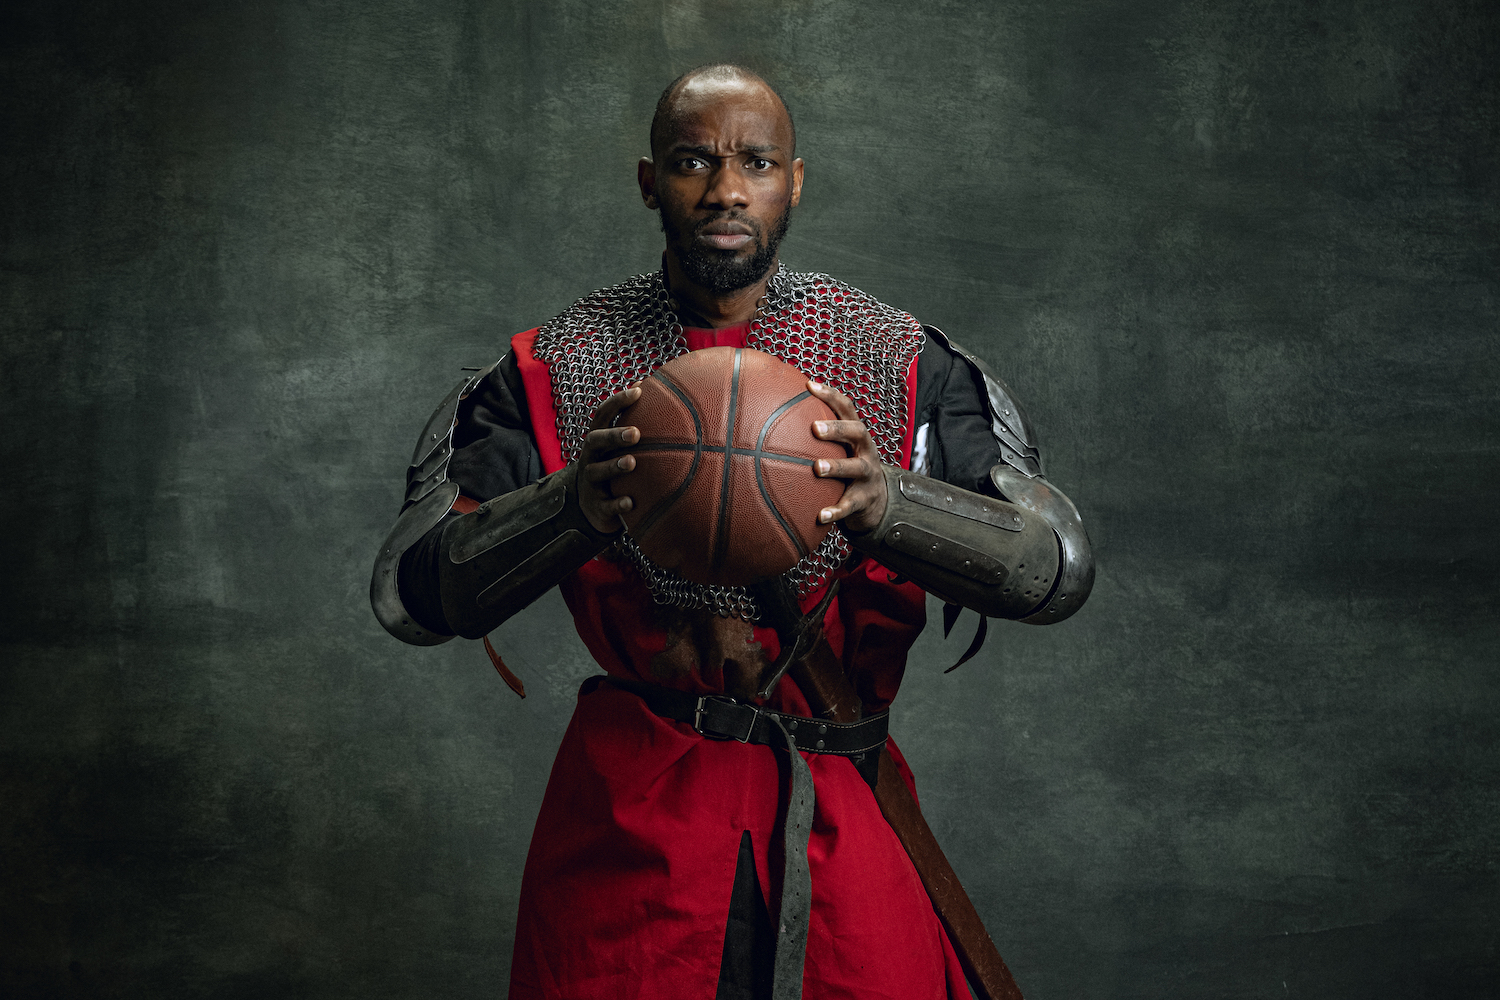 A man dressed as a knight holding a basketball